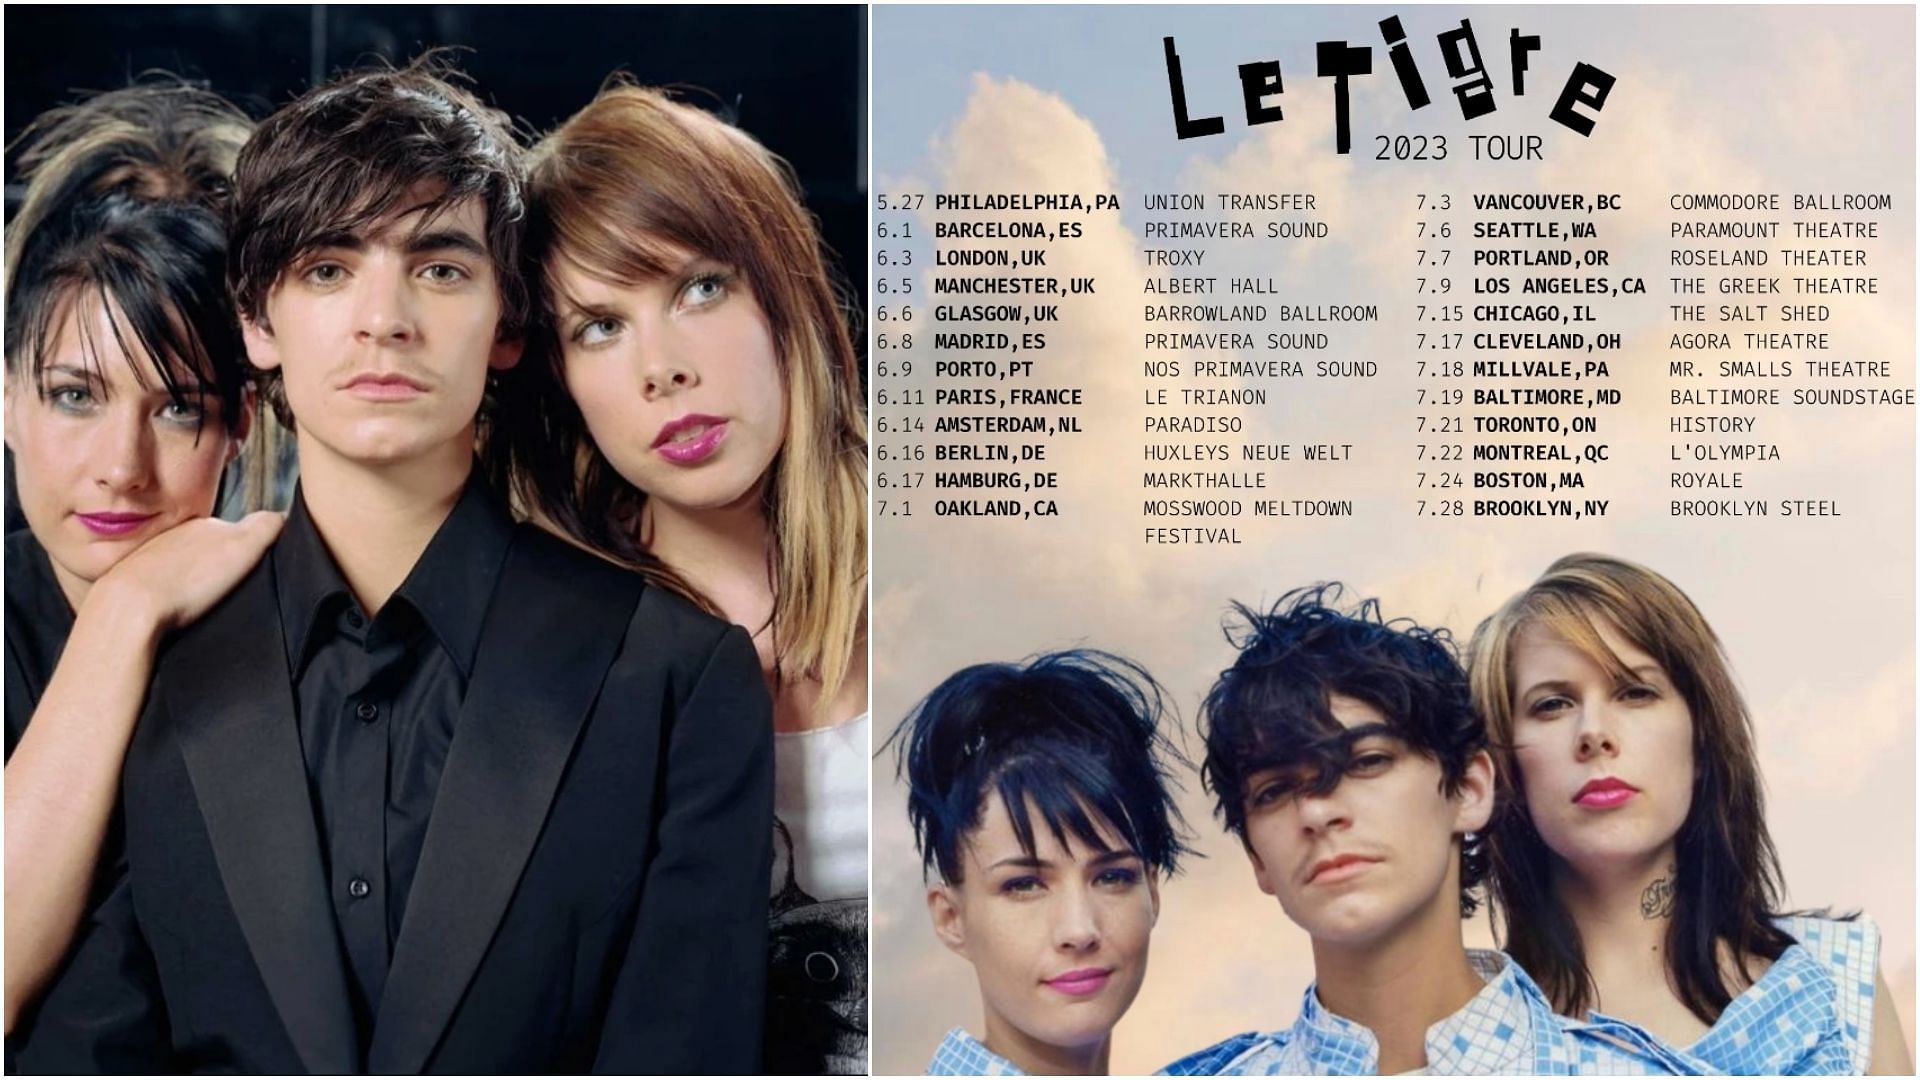 Le Tigre Tour 2023: Tickets, presale, where to buy, dates, venues and more